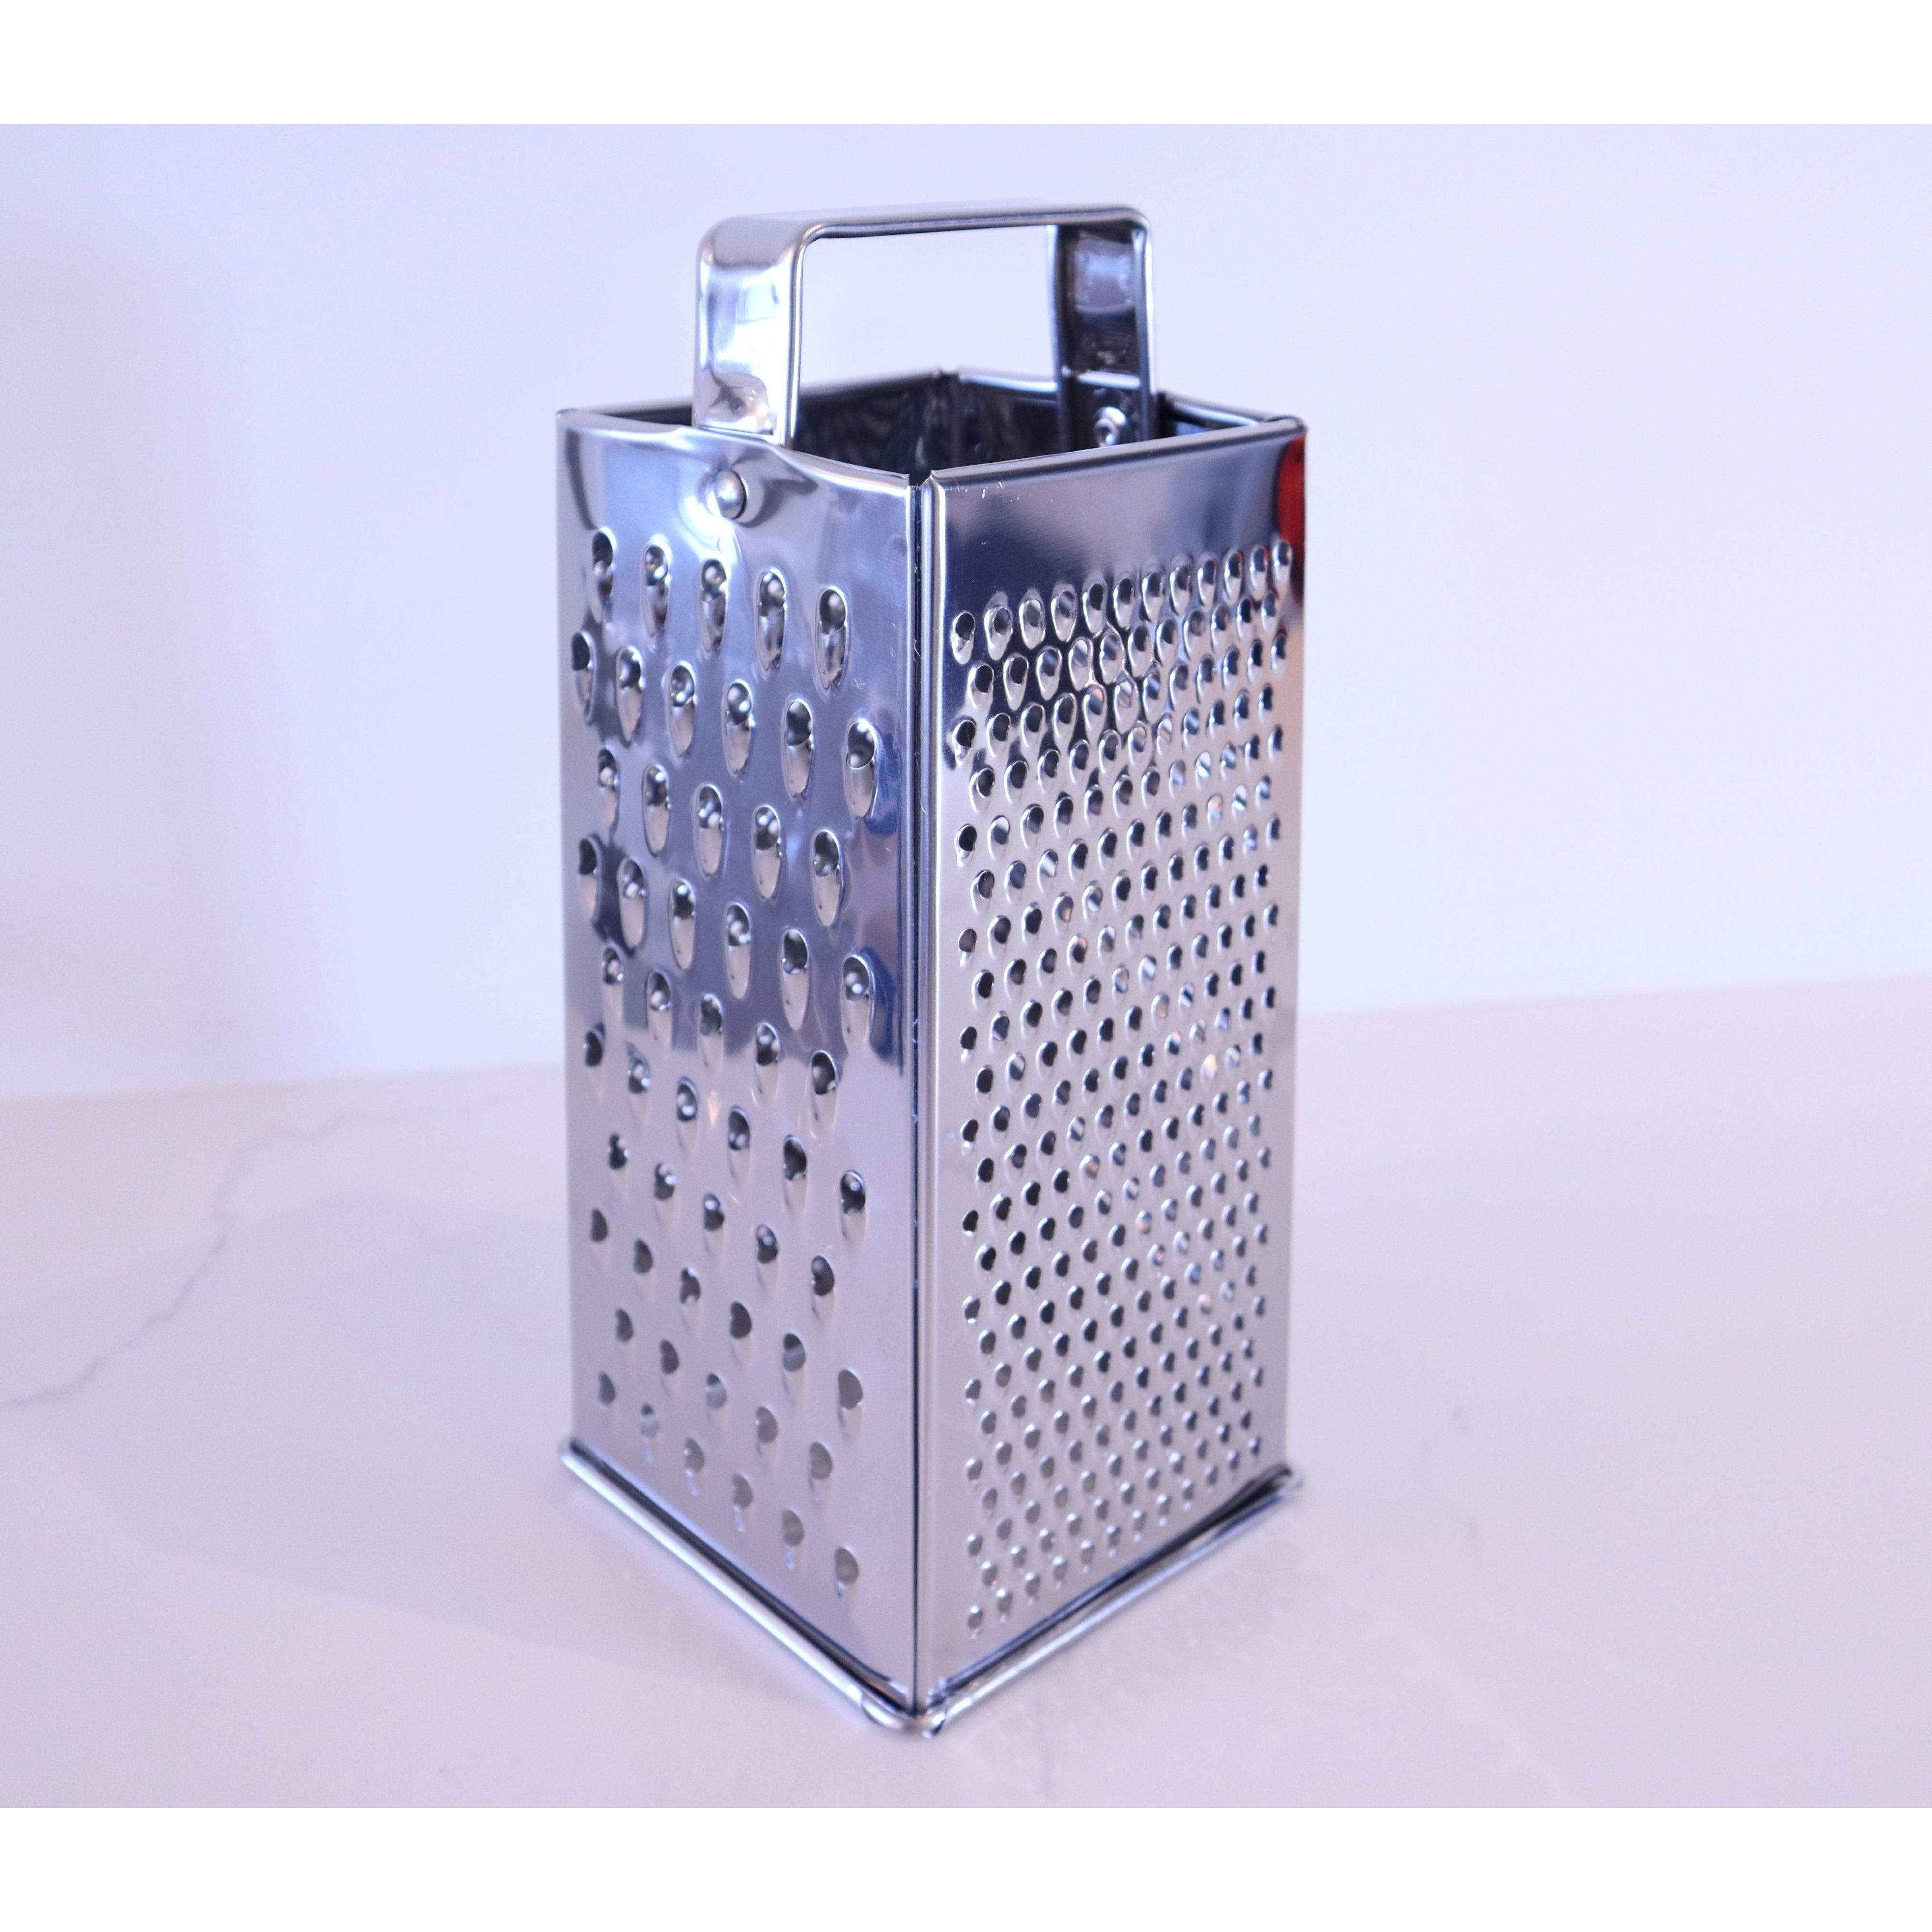 Discover the Small Professional Electric Grater of Reber